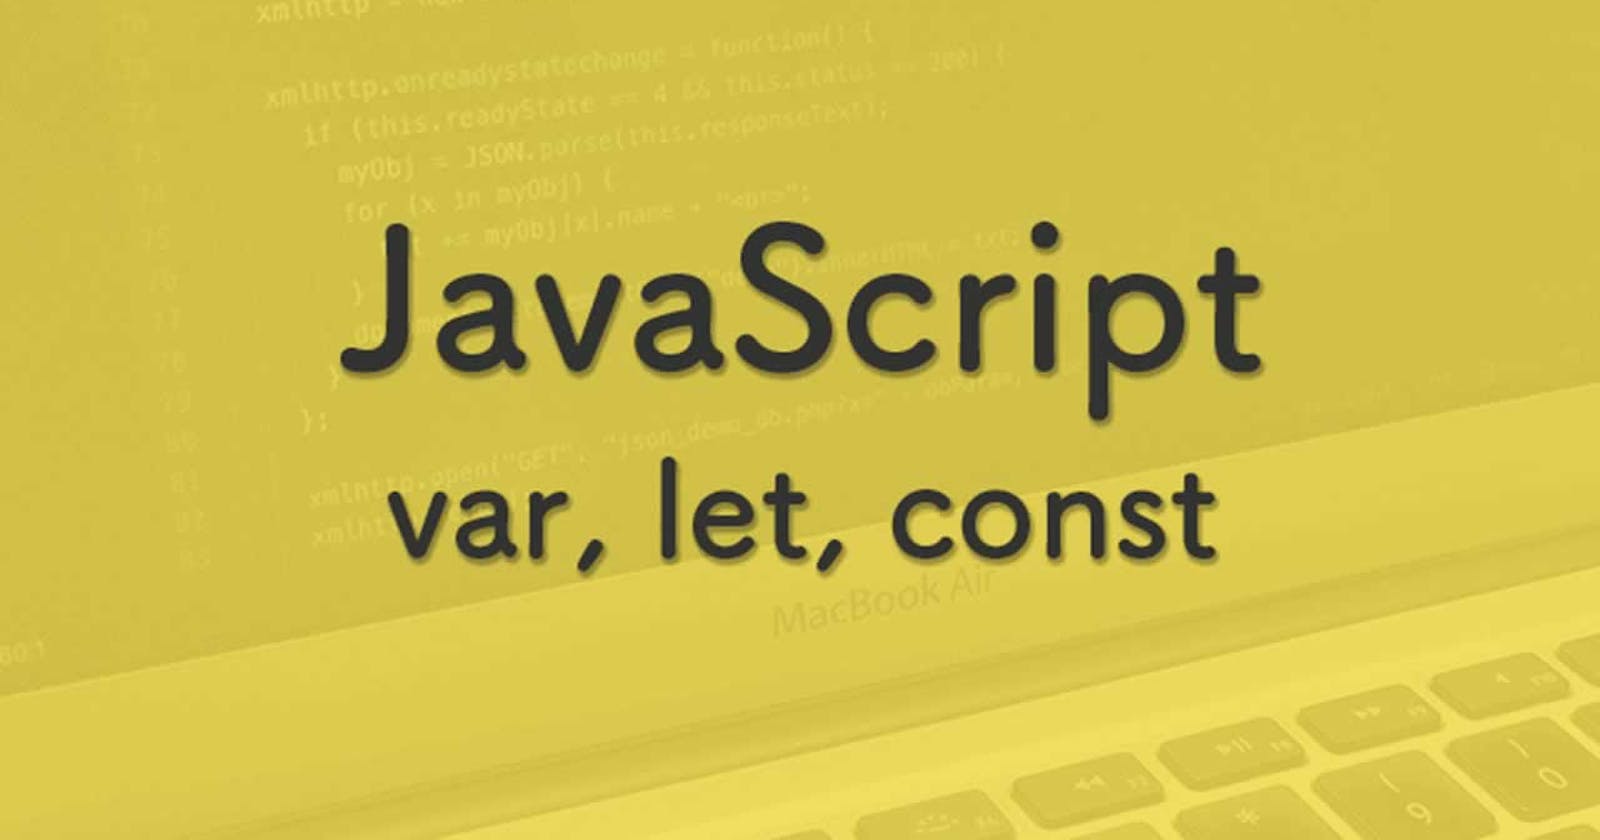 var, let and const in javascript